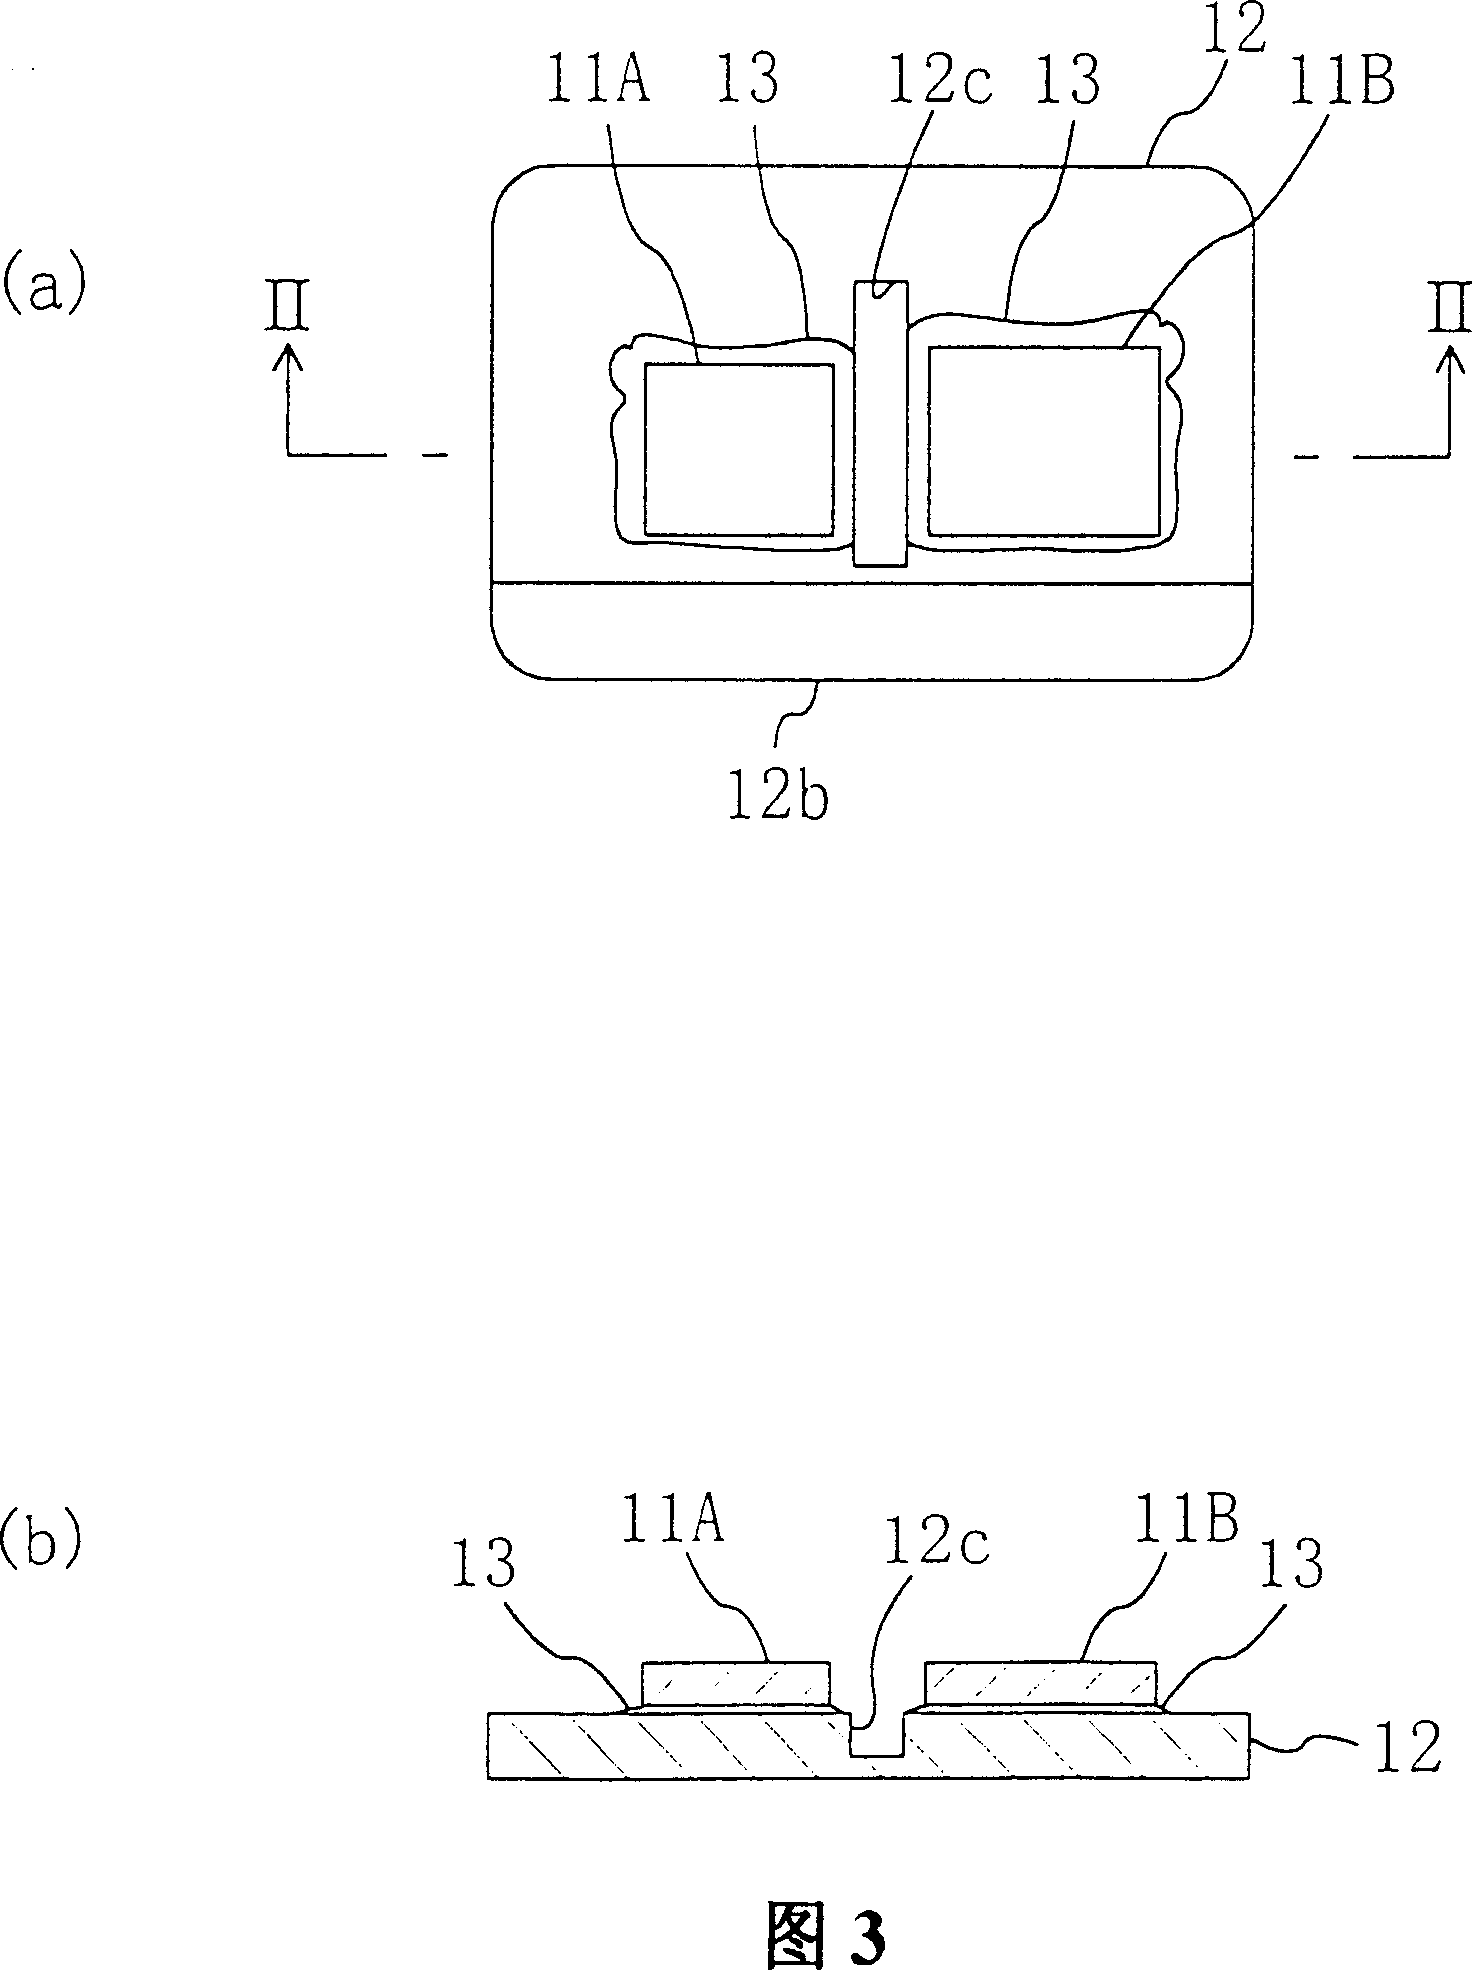 Semiconductor device and its lead frame